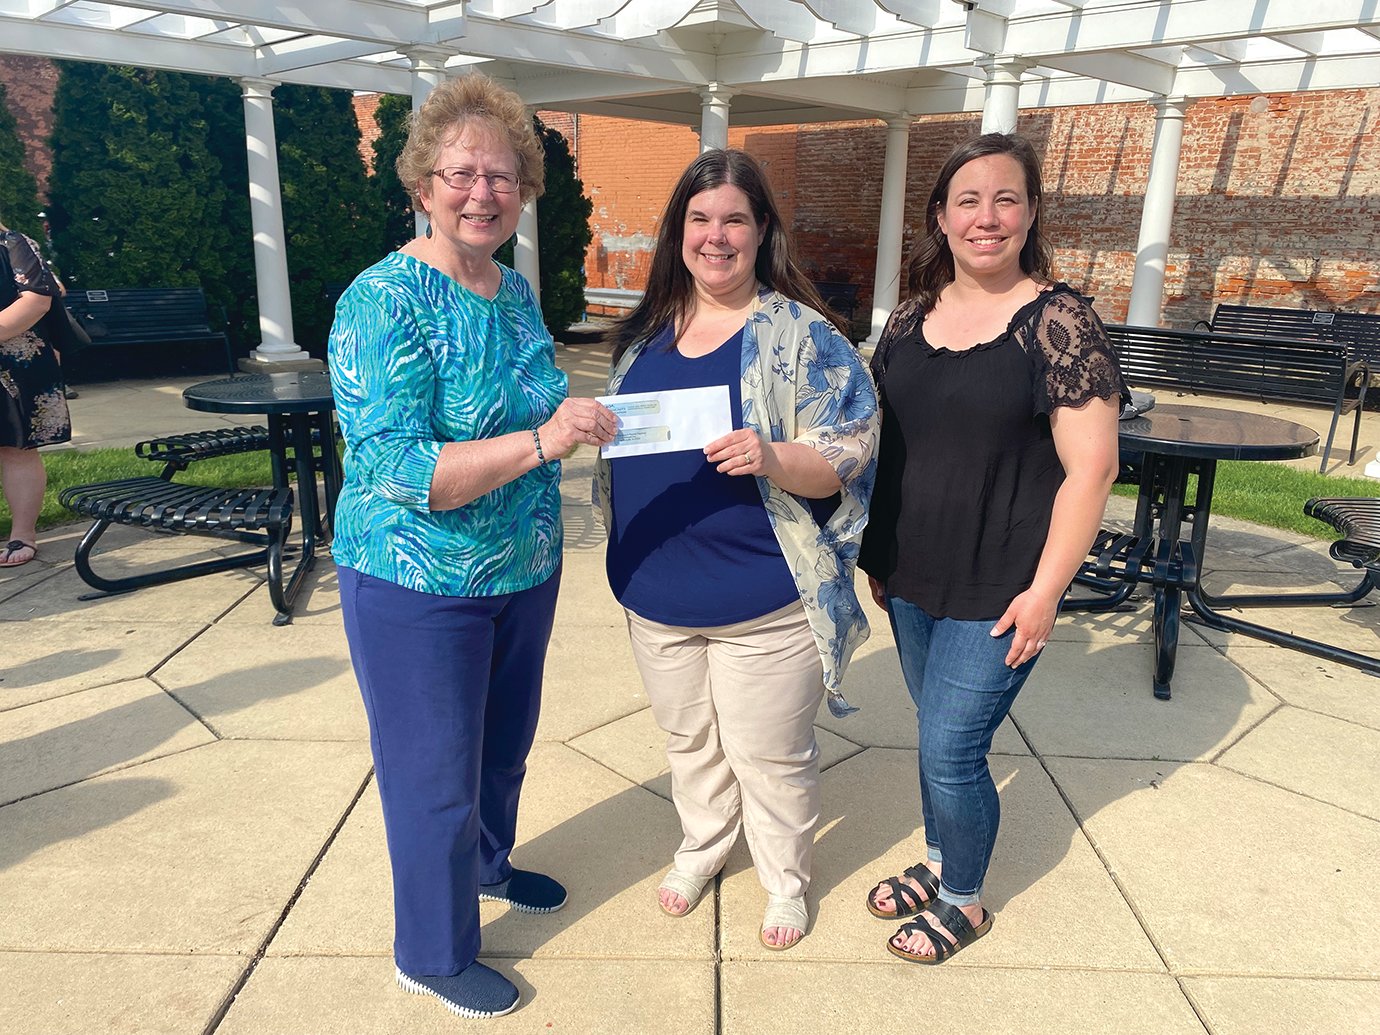 WLF Co-president Marilyn Spear, from left, presents a check to Rainbows & Rhymes Preschool representatives Emily Plummer and Brianne Pack Monday at Marie Canine Plaza.